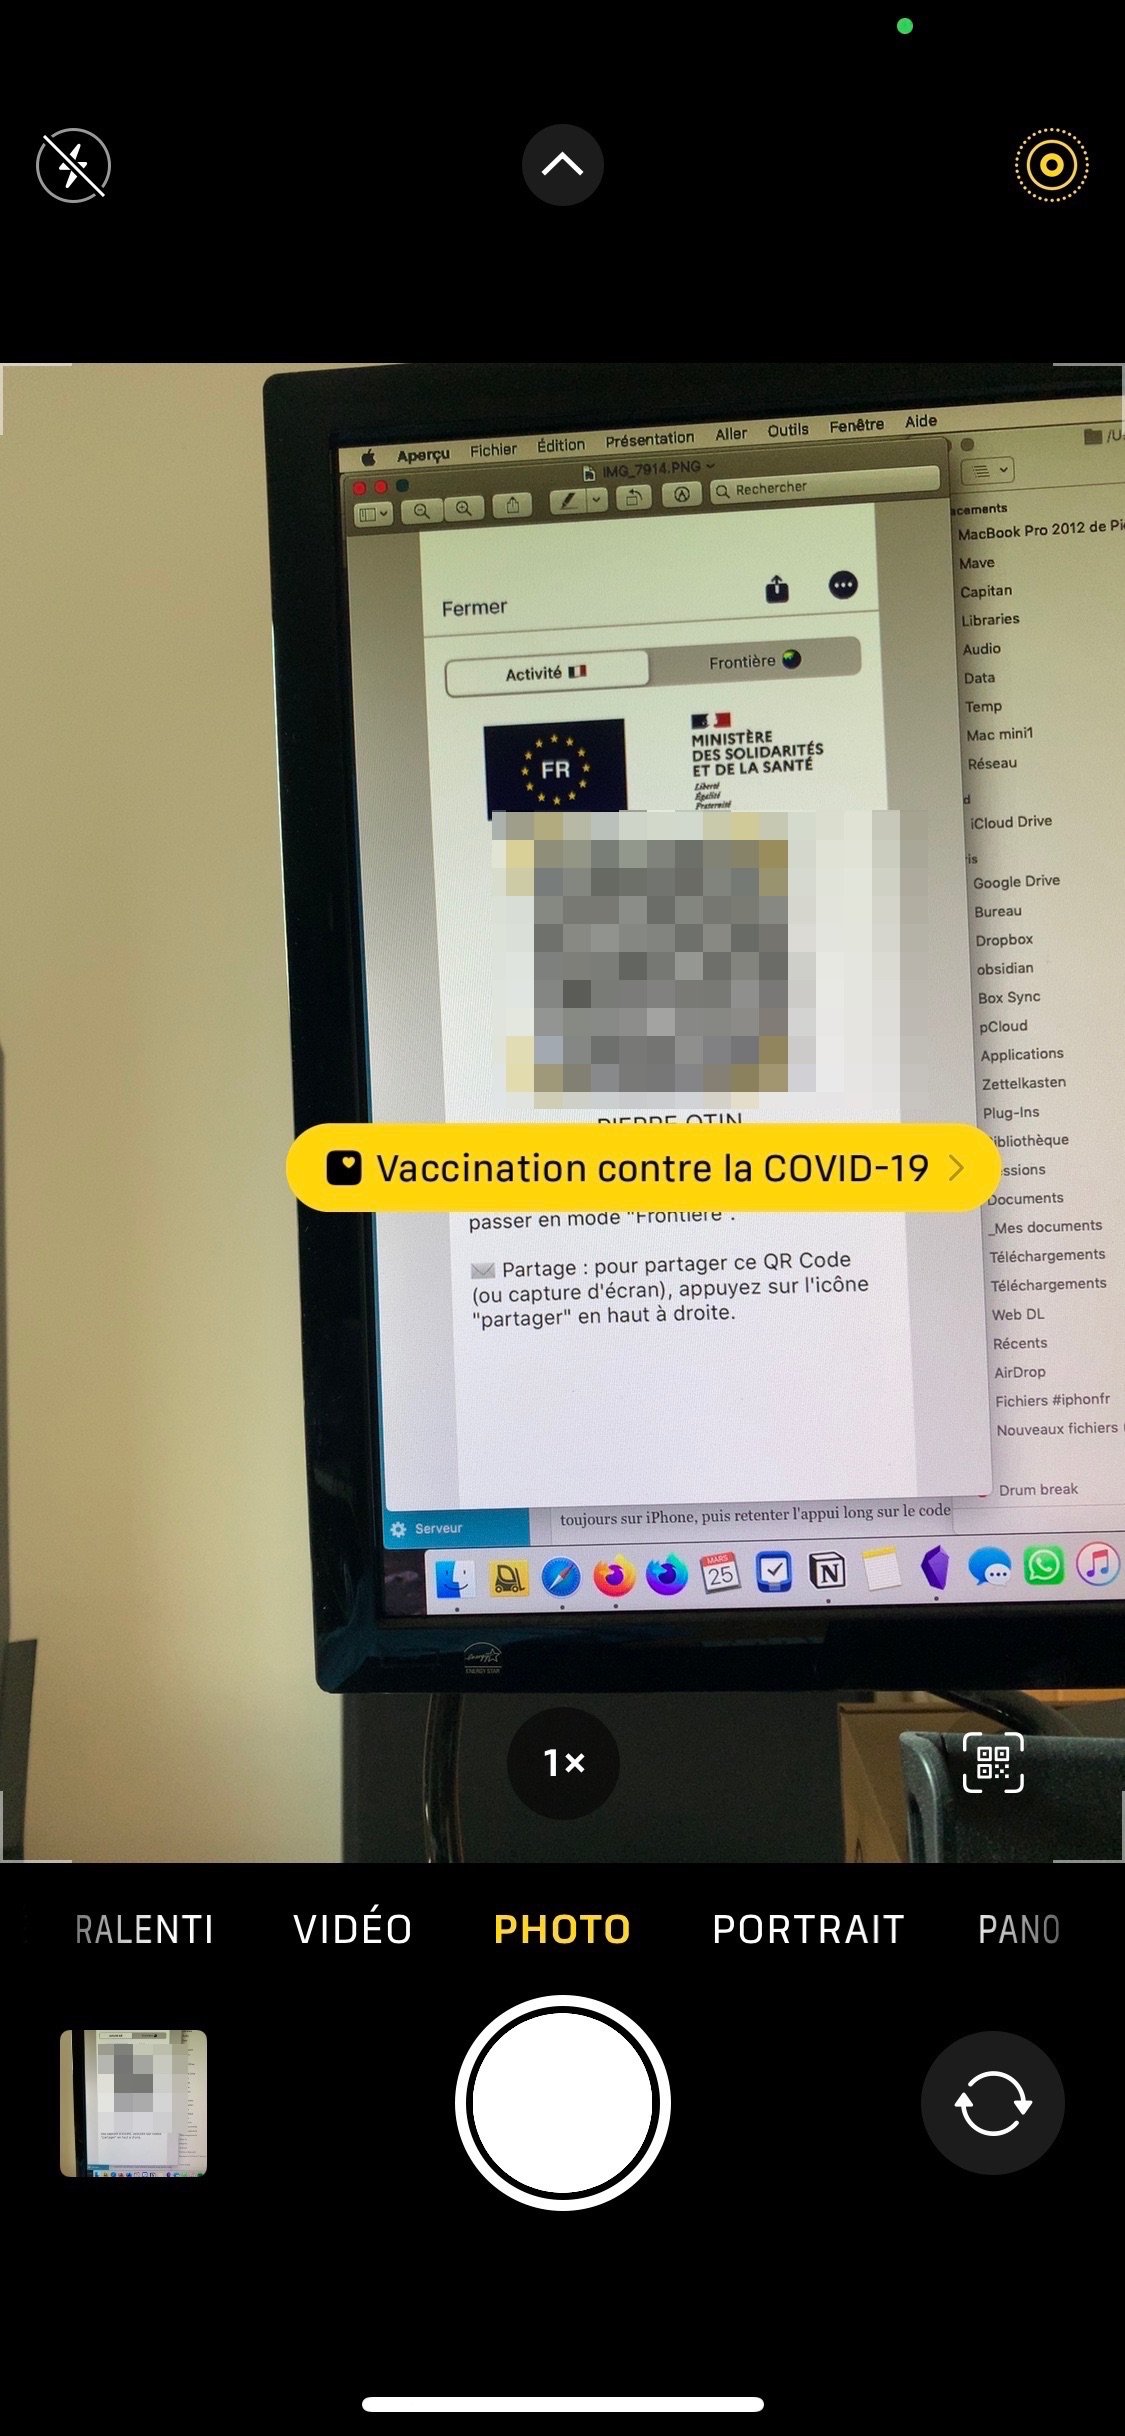 iPhone camera aiming at MacBook screen with QR code